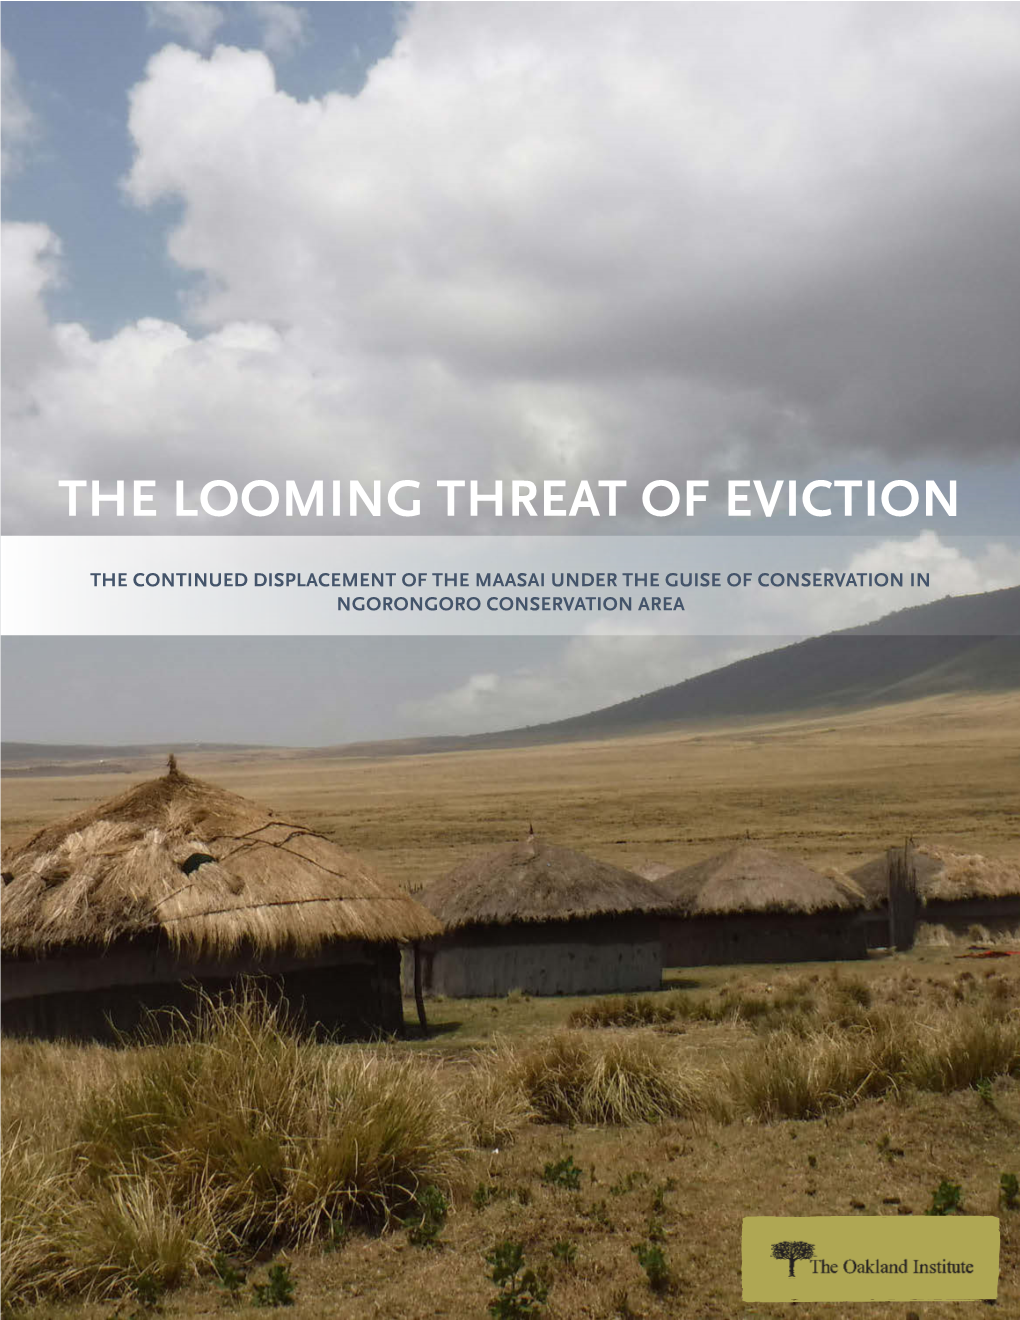 The Looming Threat of Eviction